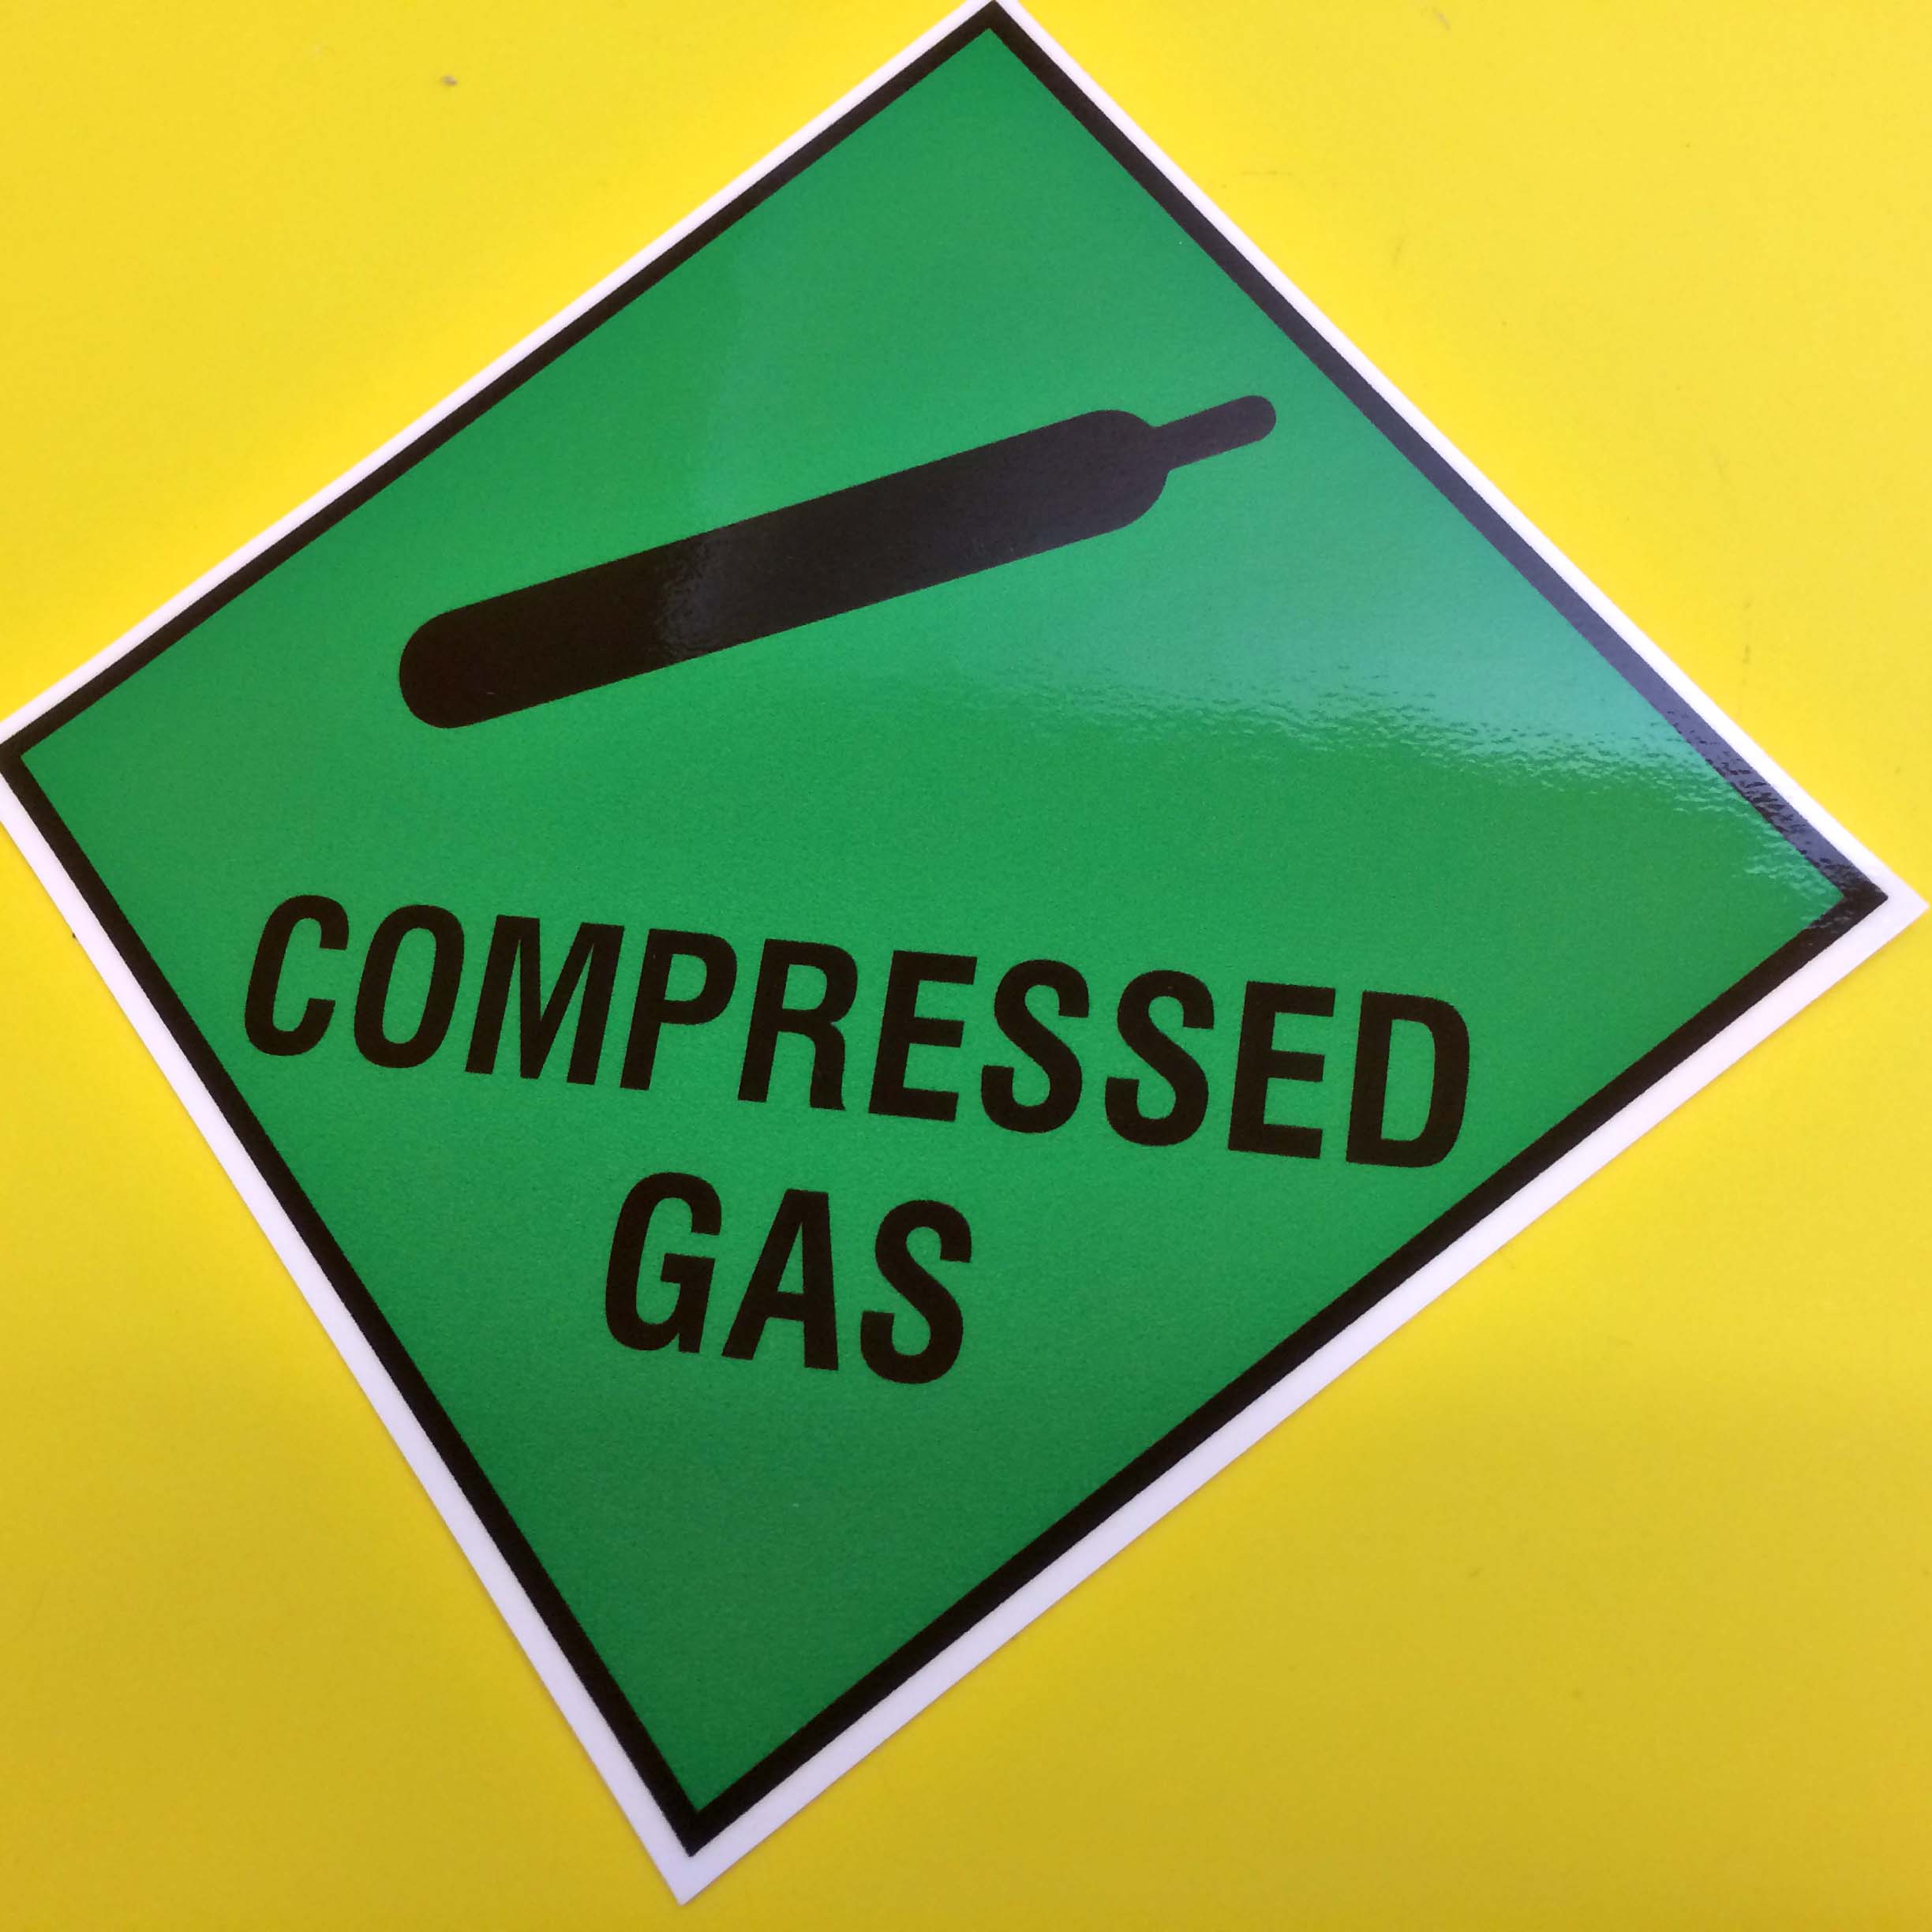 COMPRESSED GAS LAMINATED STICKER. Compressed Gas in black uppercase lettering and a gas cylinder on a green background.